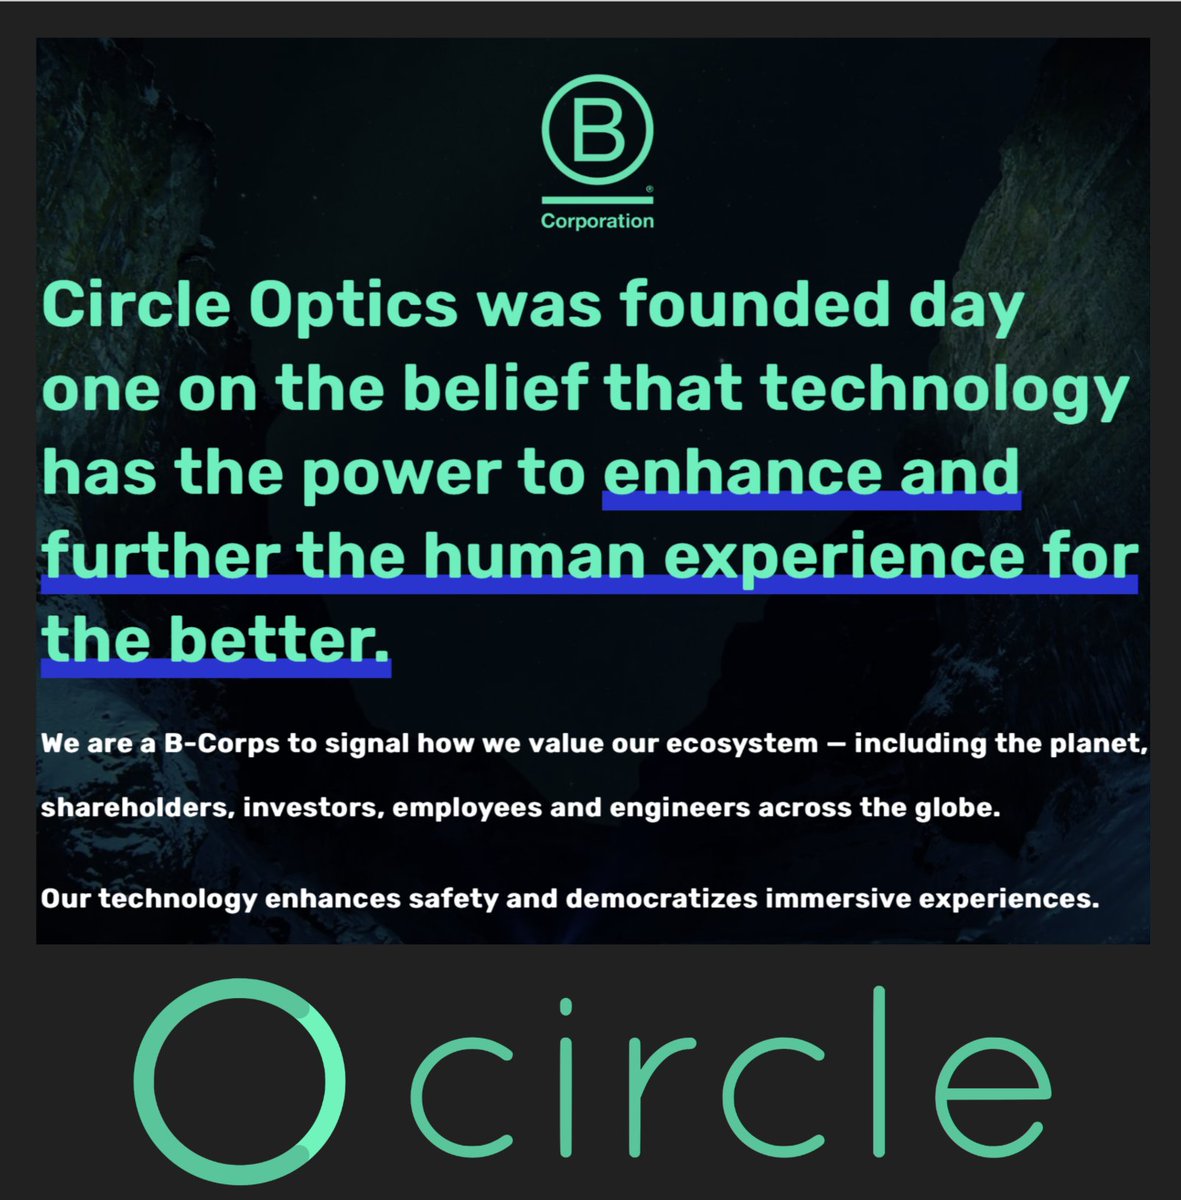 .@circleoptics was founded day one on the belief that technology has the power to  enhance and further the human experience for the better. As we celebrate #EarthDay - we look forward to learning how our technology enhances safety and democratizes immersive experiences.